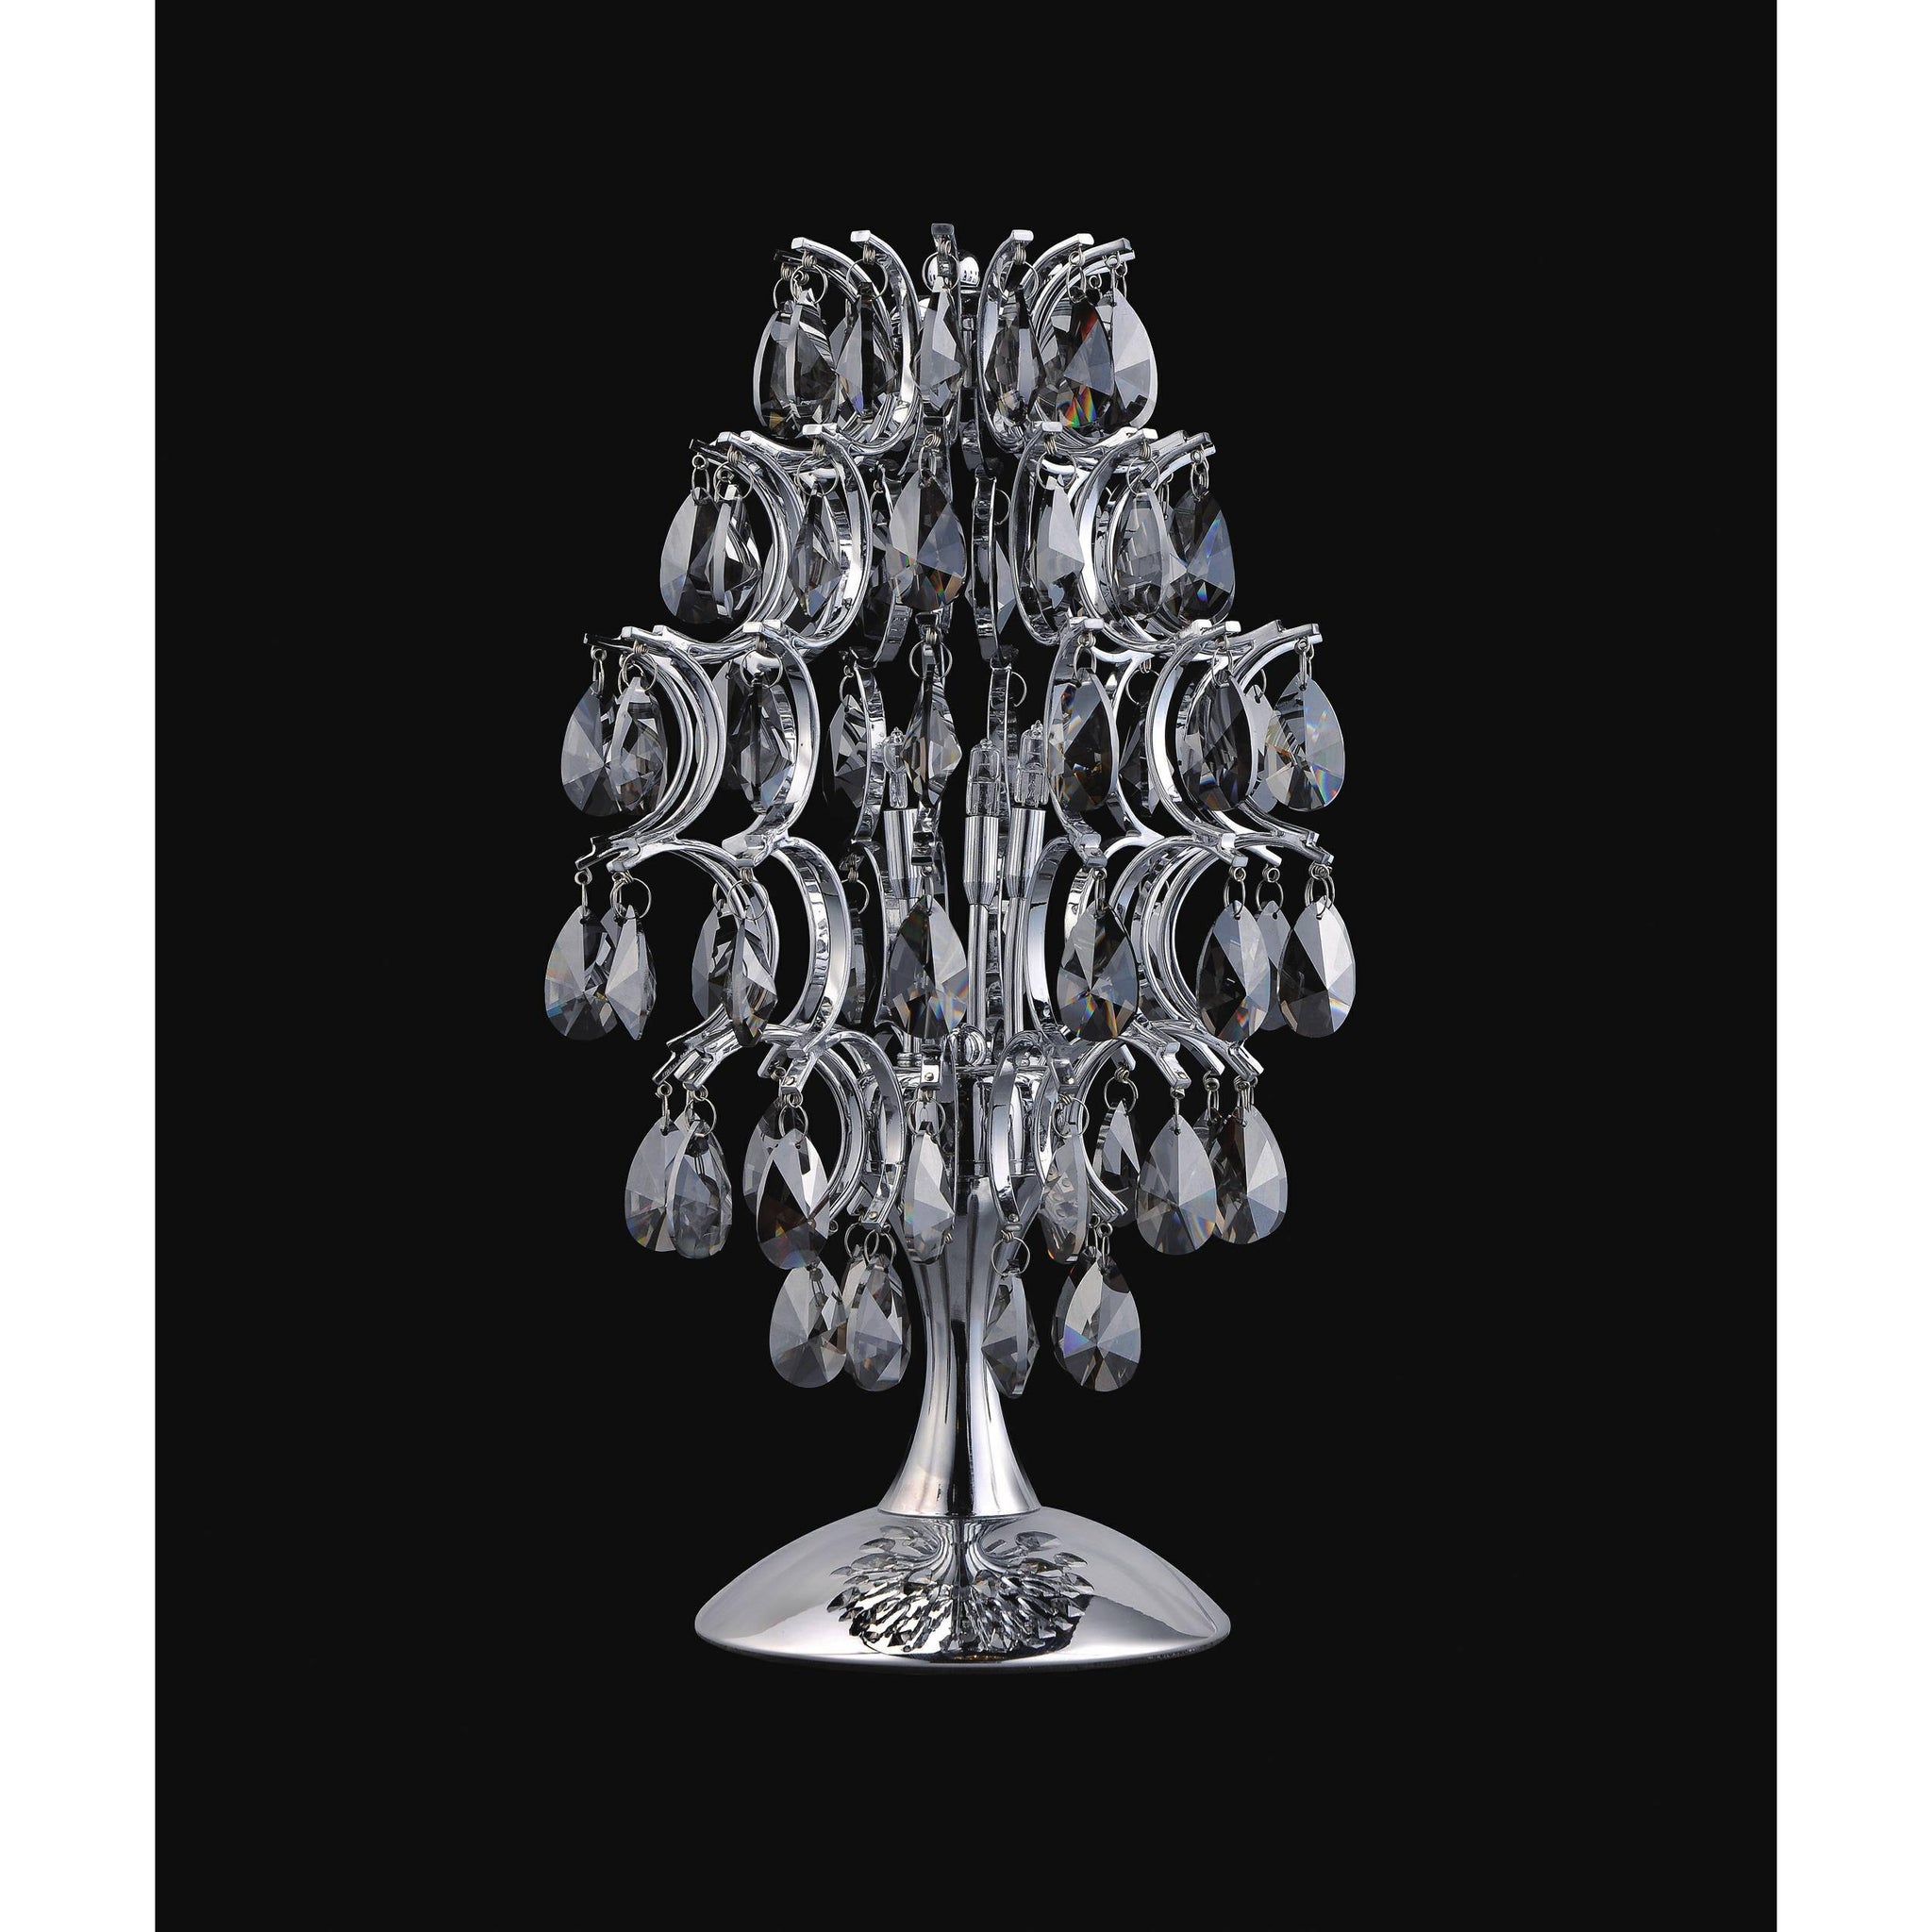 Charismatic Table Lamp